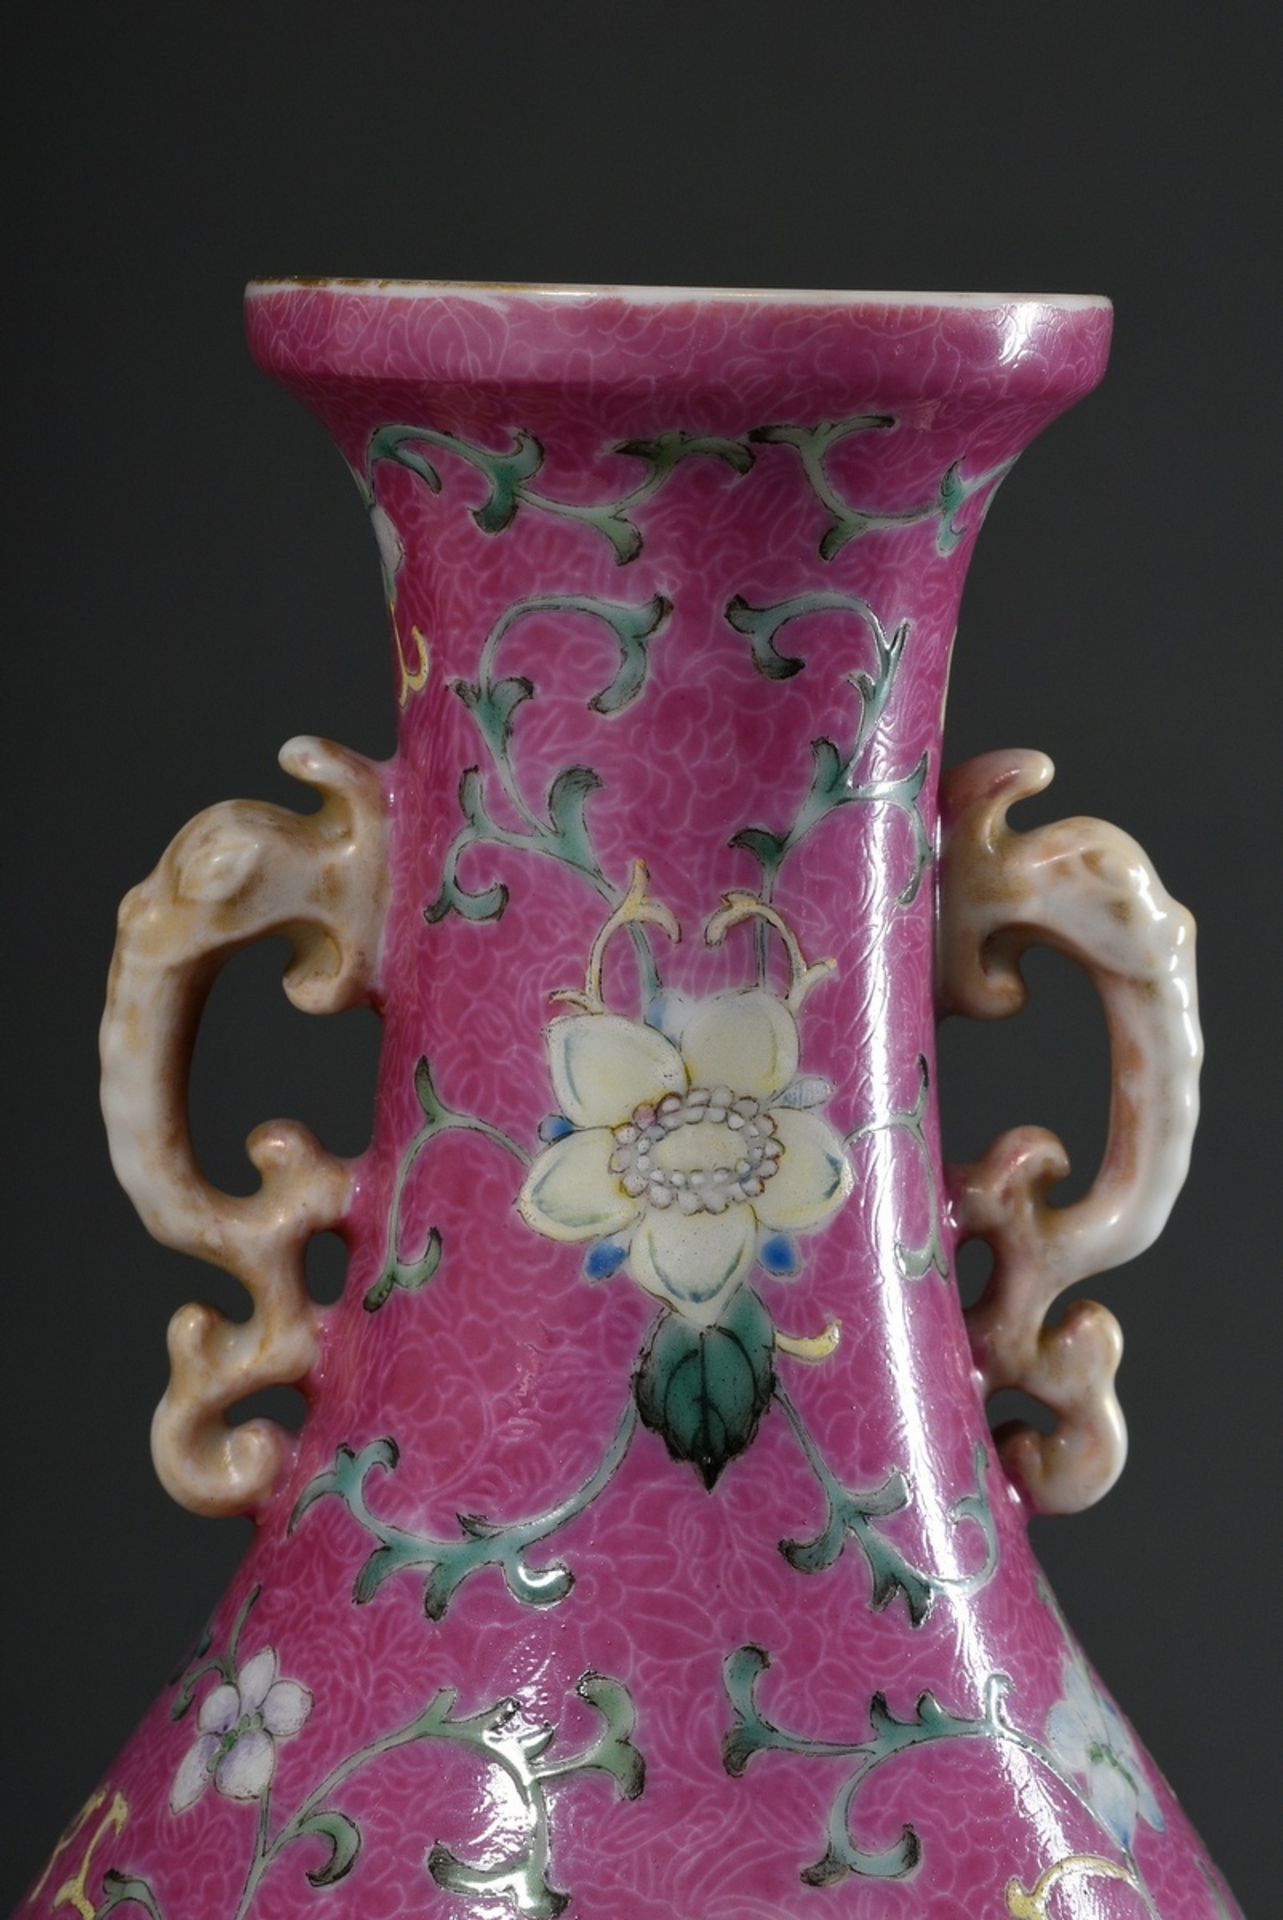 Baluster vase on a high stand ring with stylised elephant head handles and delicate enamel painting - Image 4 of 8